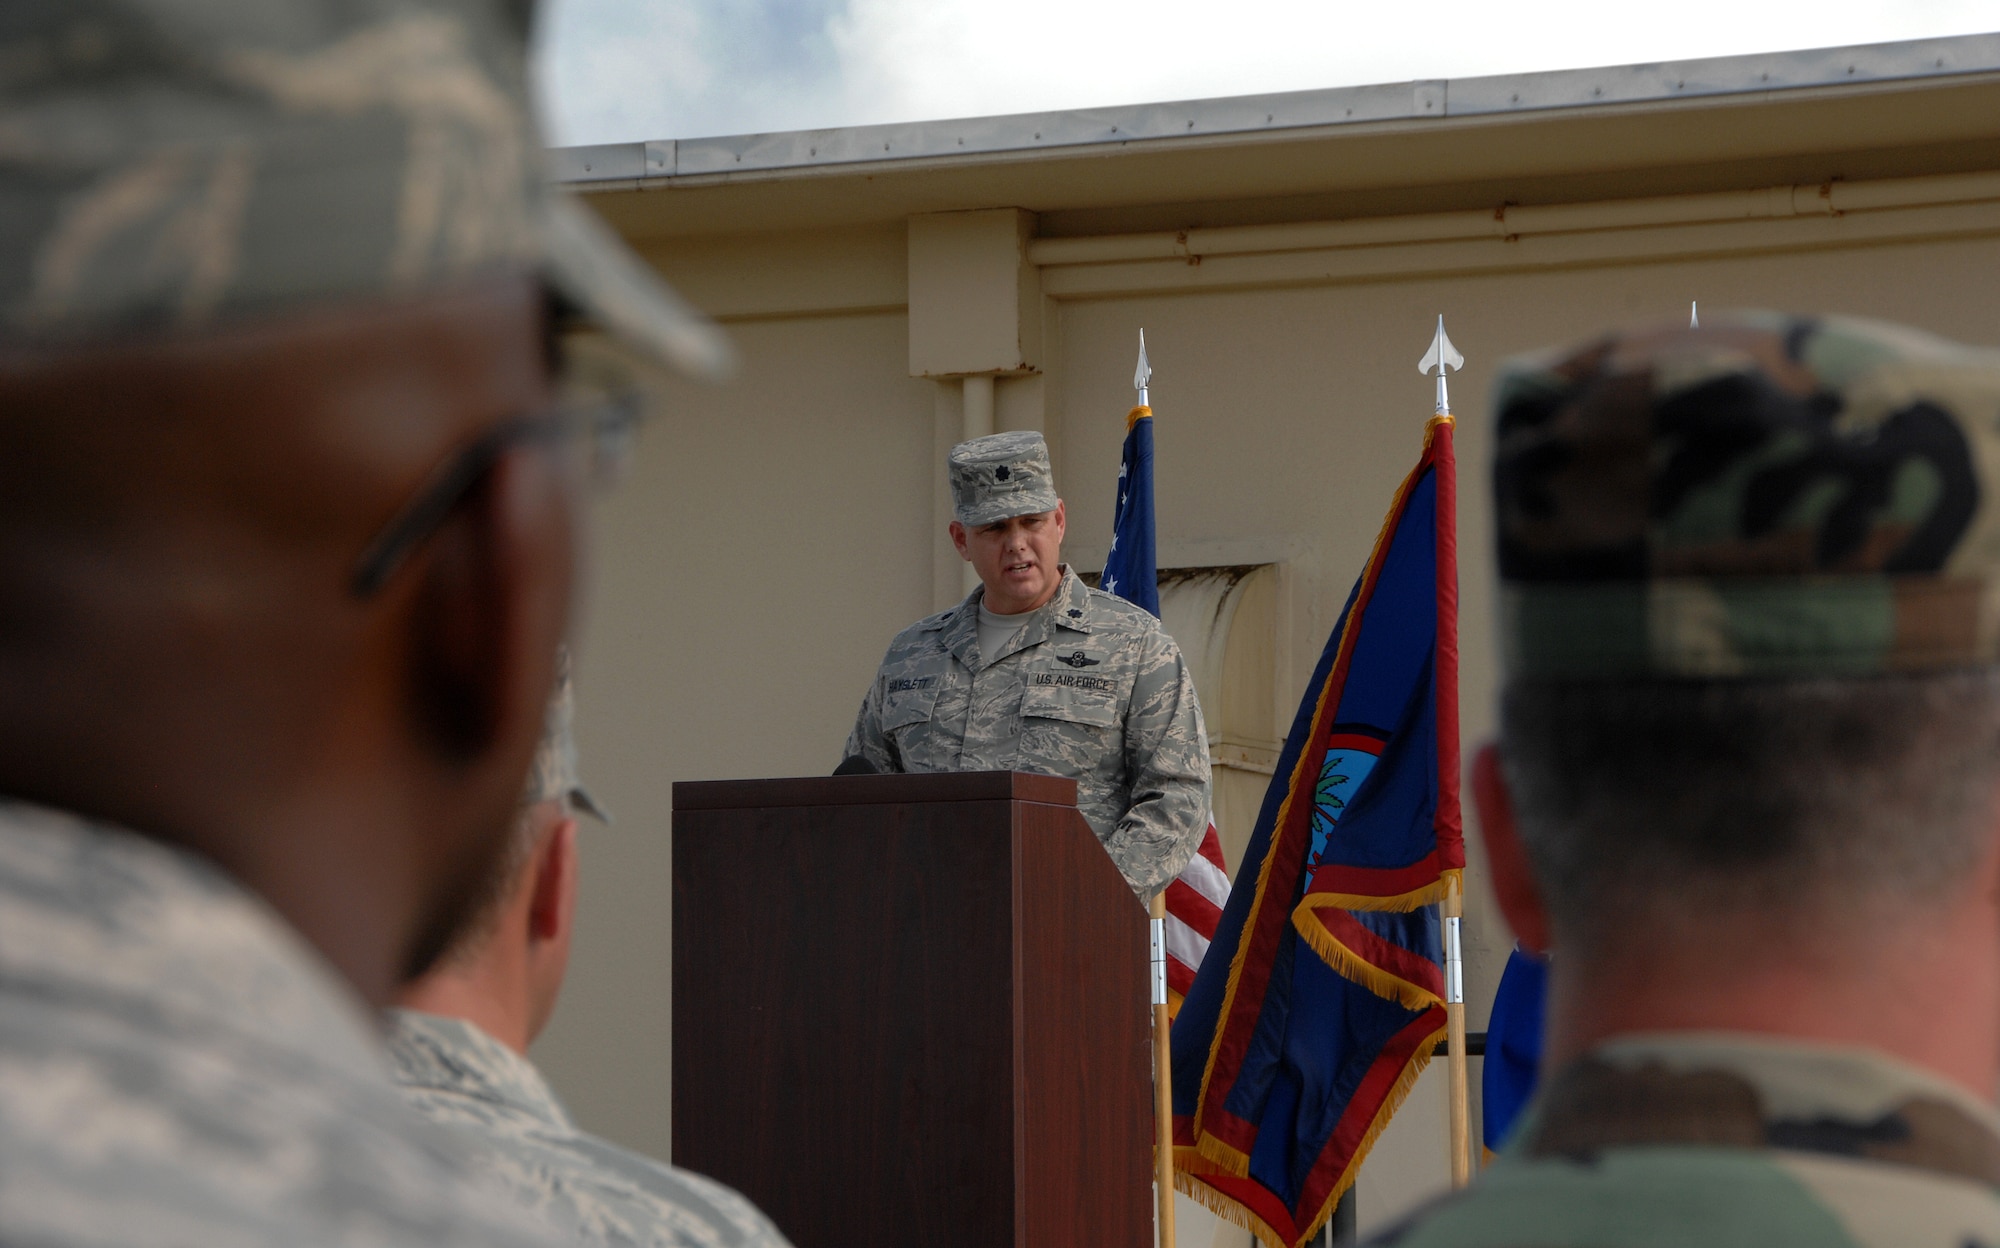 Lt. Col. Joe Hayslett speaks on his  views during the 36th Mobility Response Squadron change of command ceremony here June 27.  During his speech, Airmen listen intently to what their new commander expects of them. (U.S. Air Force photo by Airman 1st Class Courtney Witt)